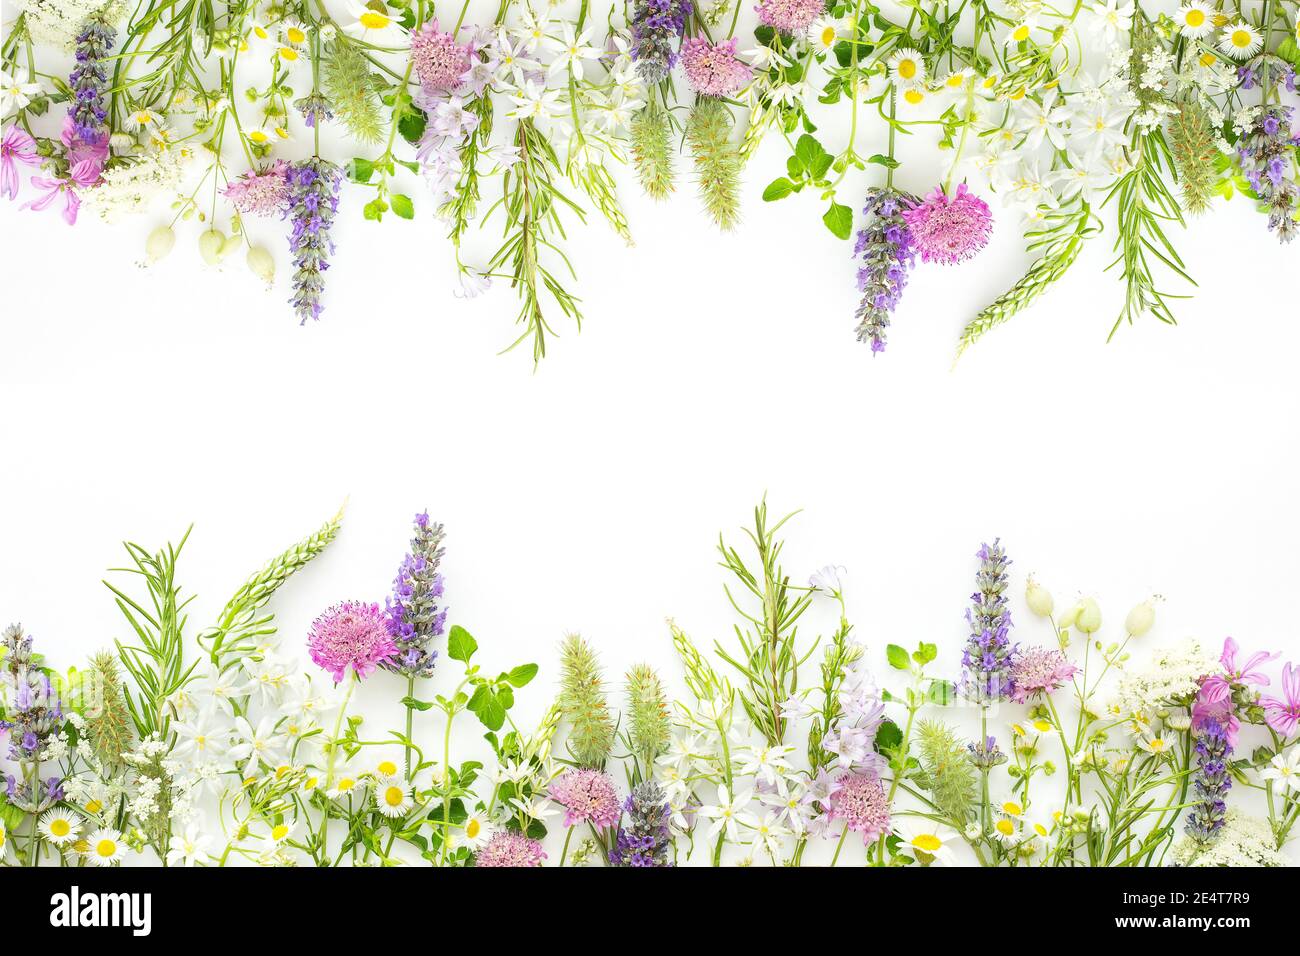 Composition of wild flowers and aromatic herbs on a white background. Stock Photo